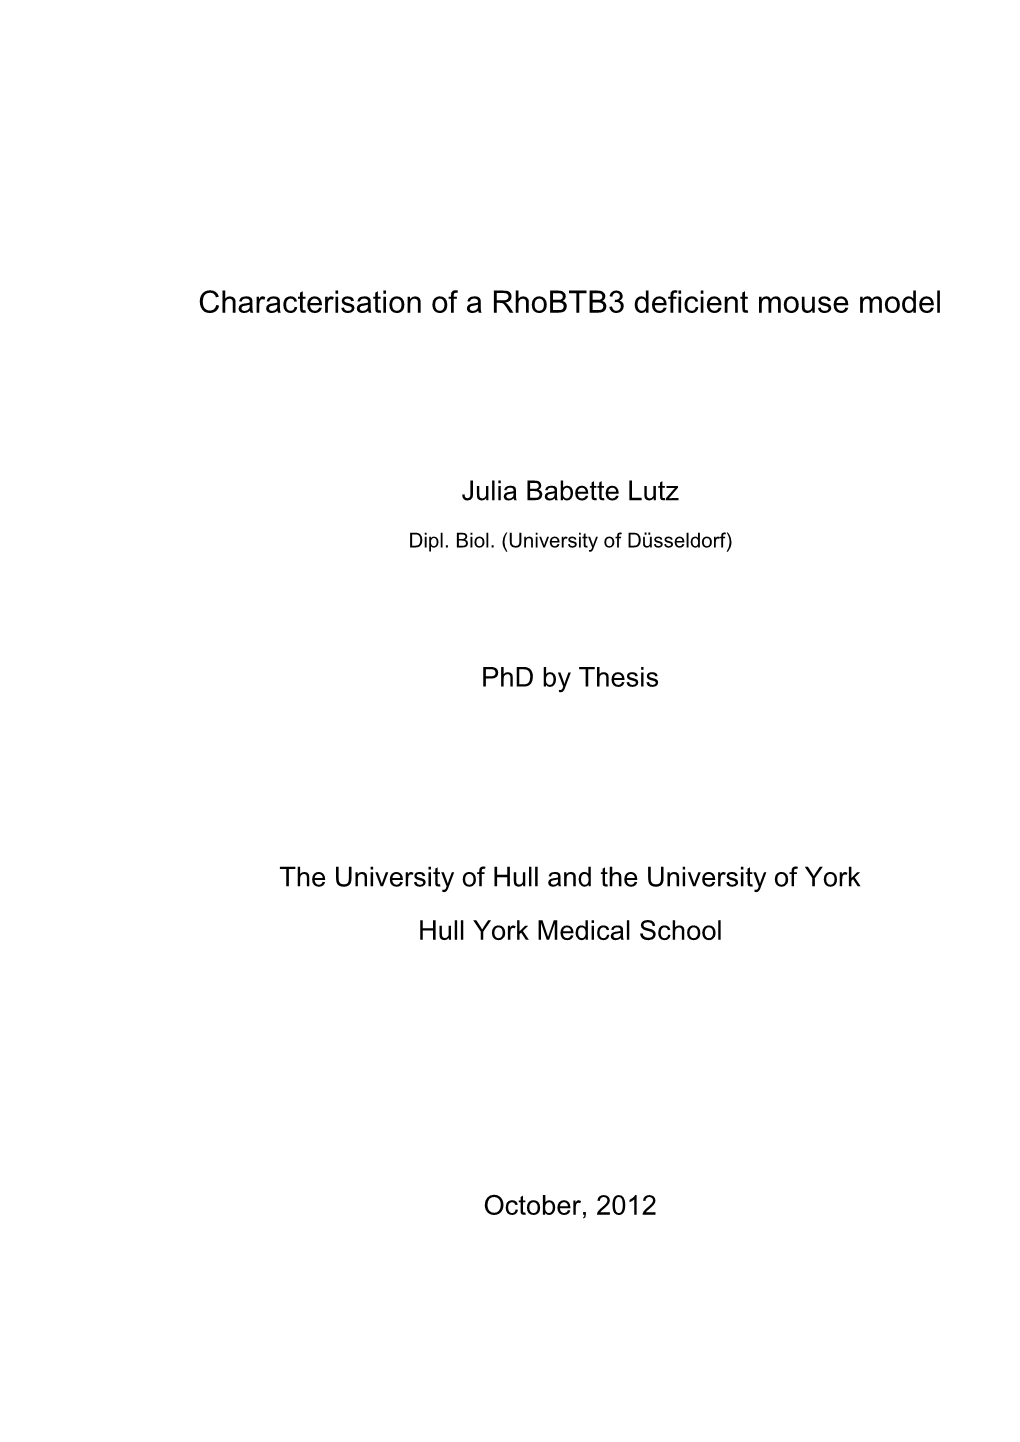 Characterisation of a Rhobtb3 Deficient Mouse Model